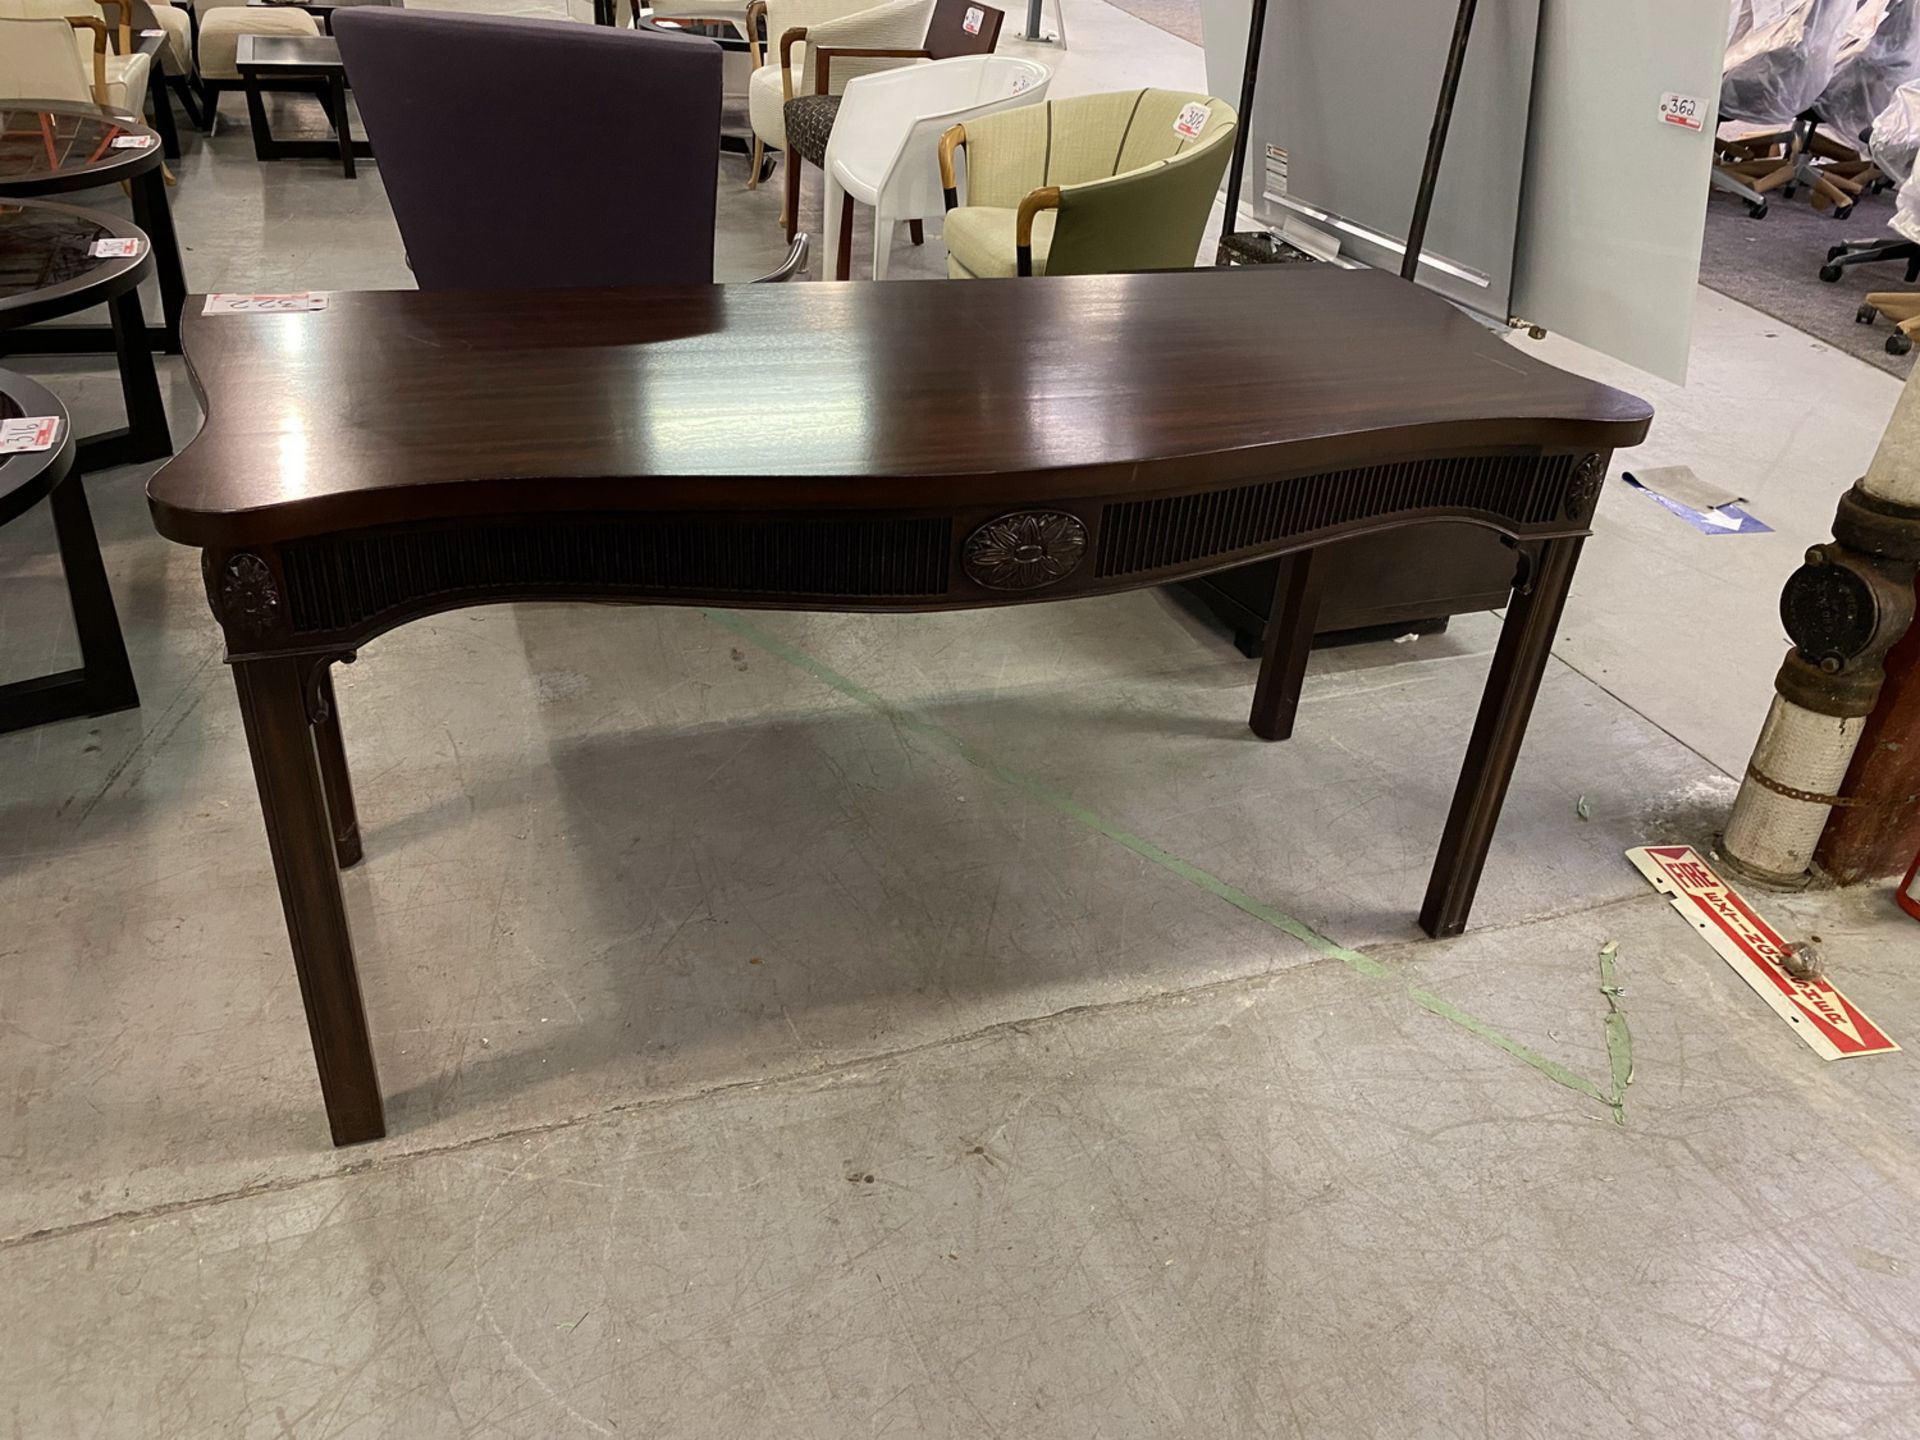 GIORGETTI MAHOGANY 26 X 64.5 X 32.5" TABLE (SCRATCHES ON TOP)